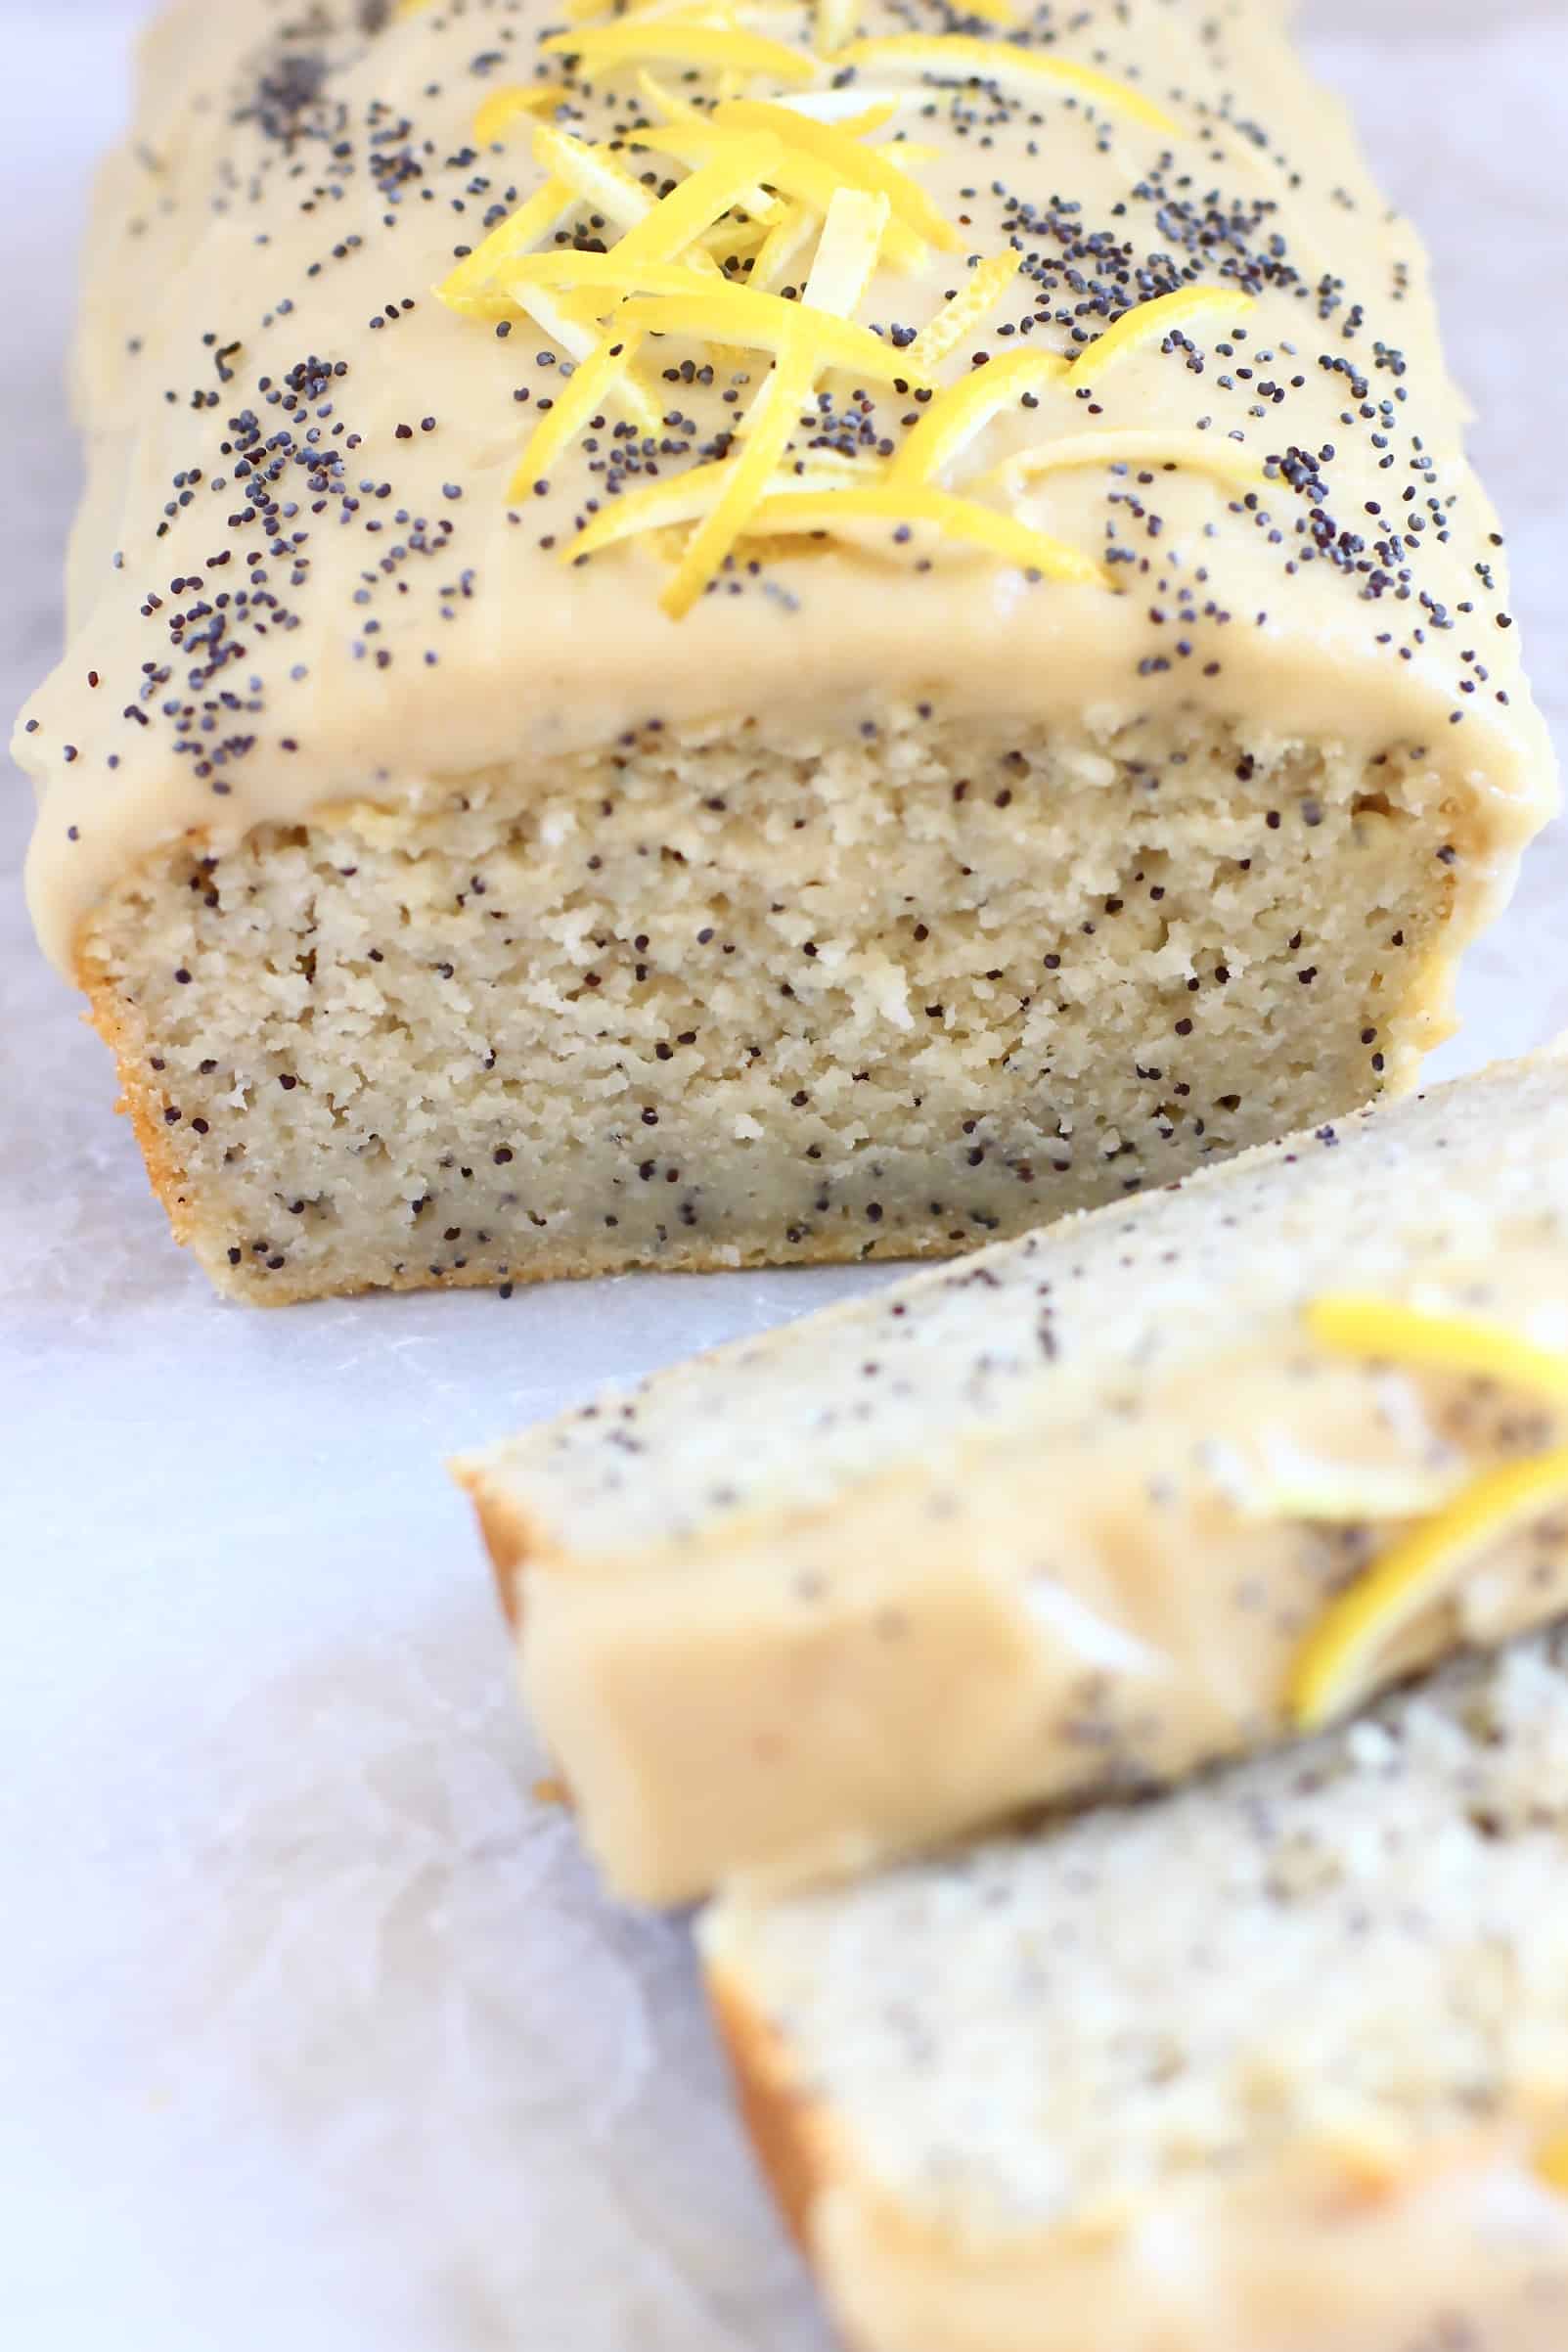 Lemon poppy seed loaf cake topped with frosting, lemon zest and poppy seeds with two slices next to it